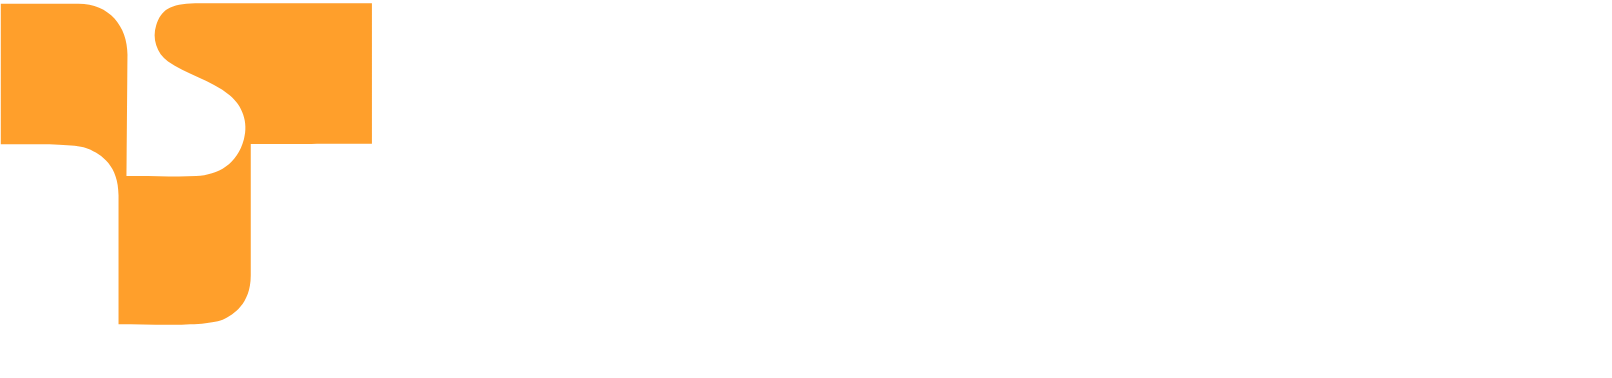 Territorial Bancorp
 logo large for dark backgrounds (transparent PNG)